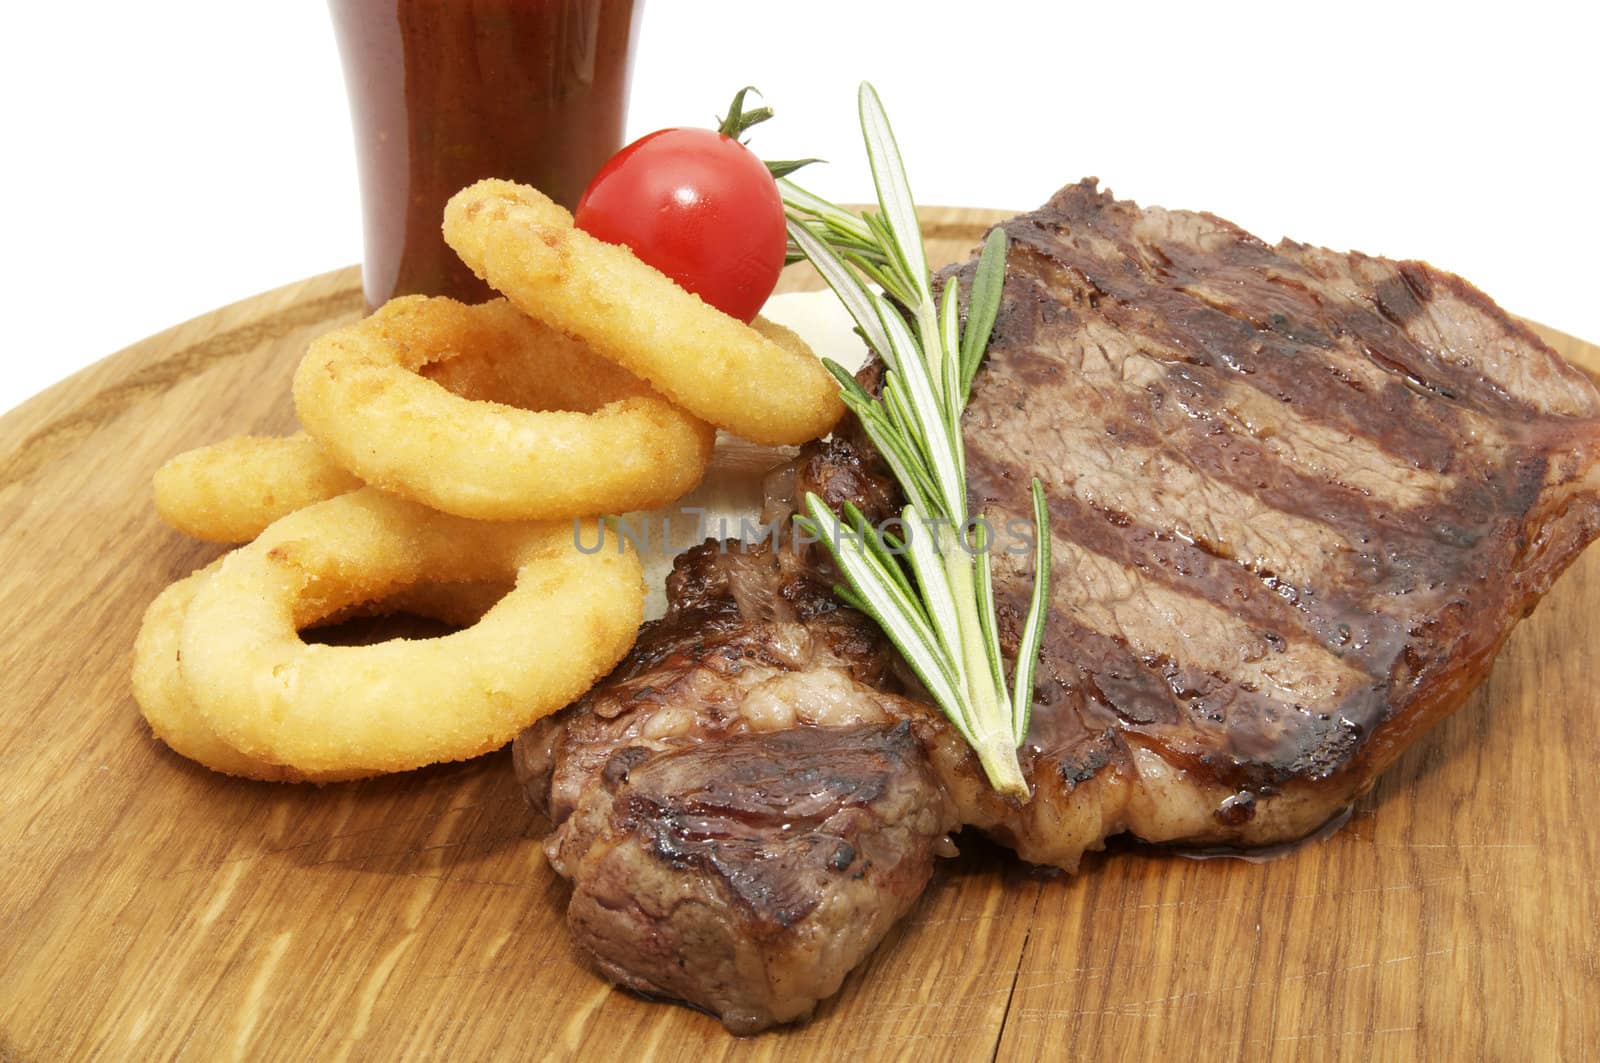 steak grilled with onion rings and sauce on a wooden plate